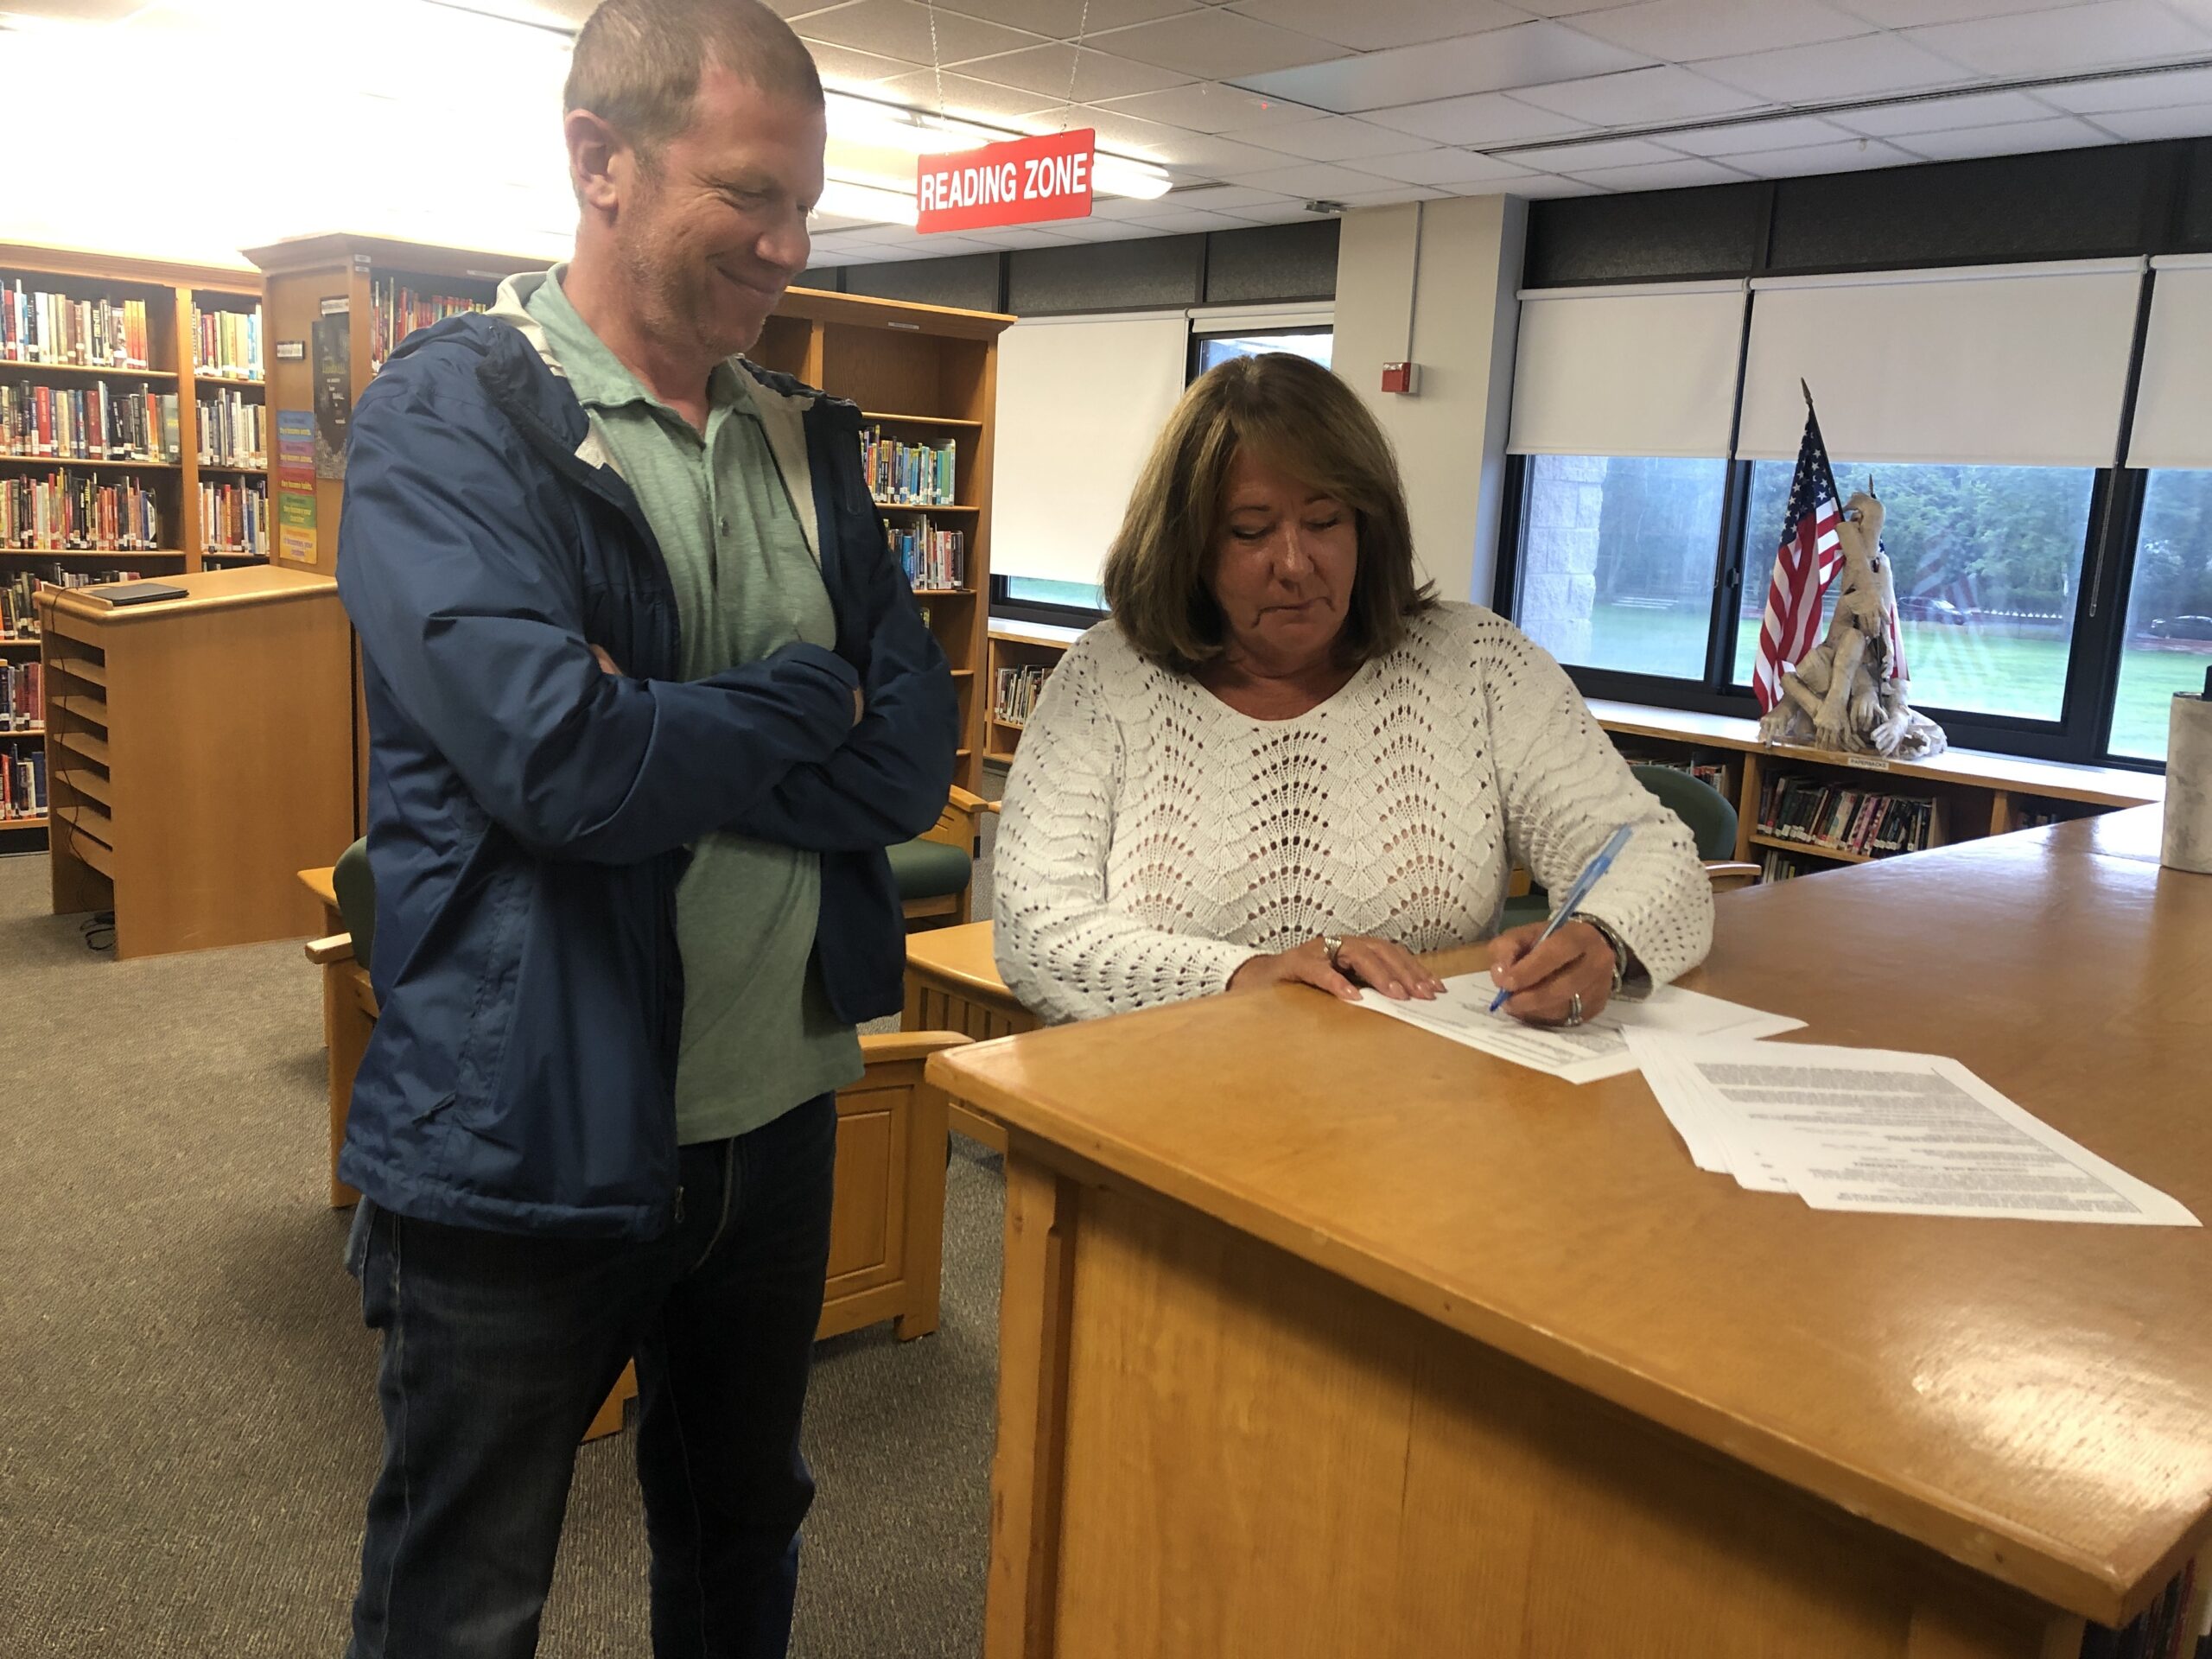 Sag Harbor School Board President Sandi Kruel signs an agreement to purchase a three-quarter acre lot on Marsden Street with money from the district's capital reserves. Pending voter approval, the district will buy that lot, along with four other adjoining lots on the street, with help from the Southampton Town Community Preservation Fund, and will build an athletic facility there. CAILIN RILEY PHOTOS